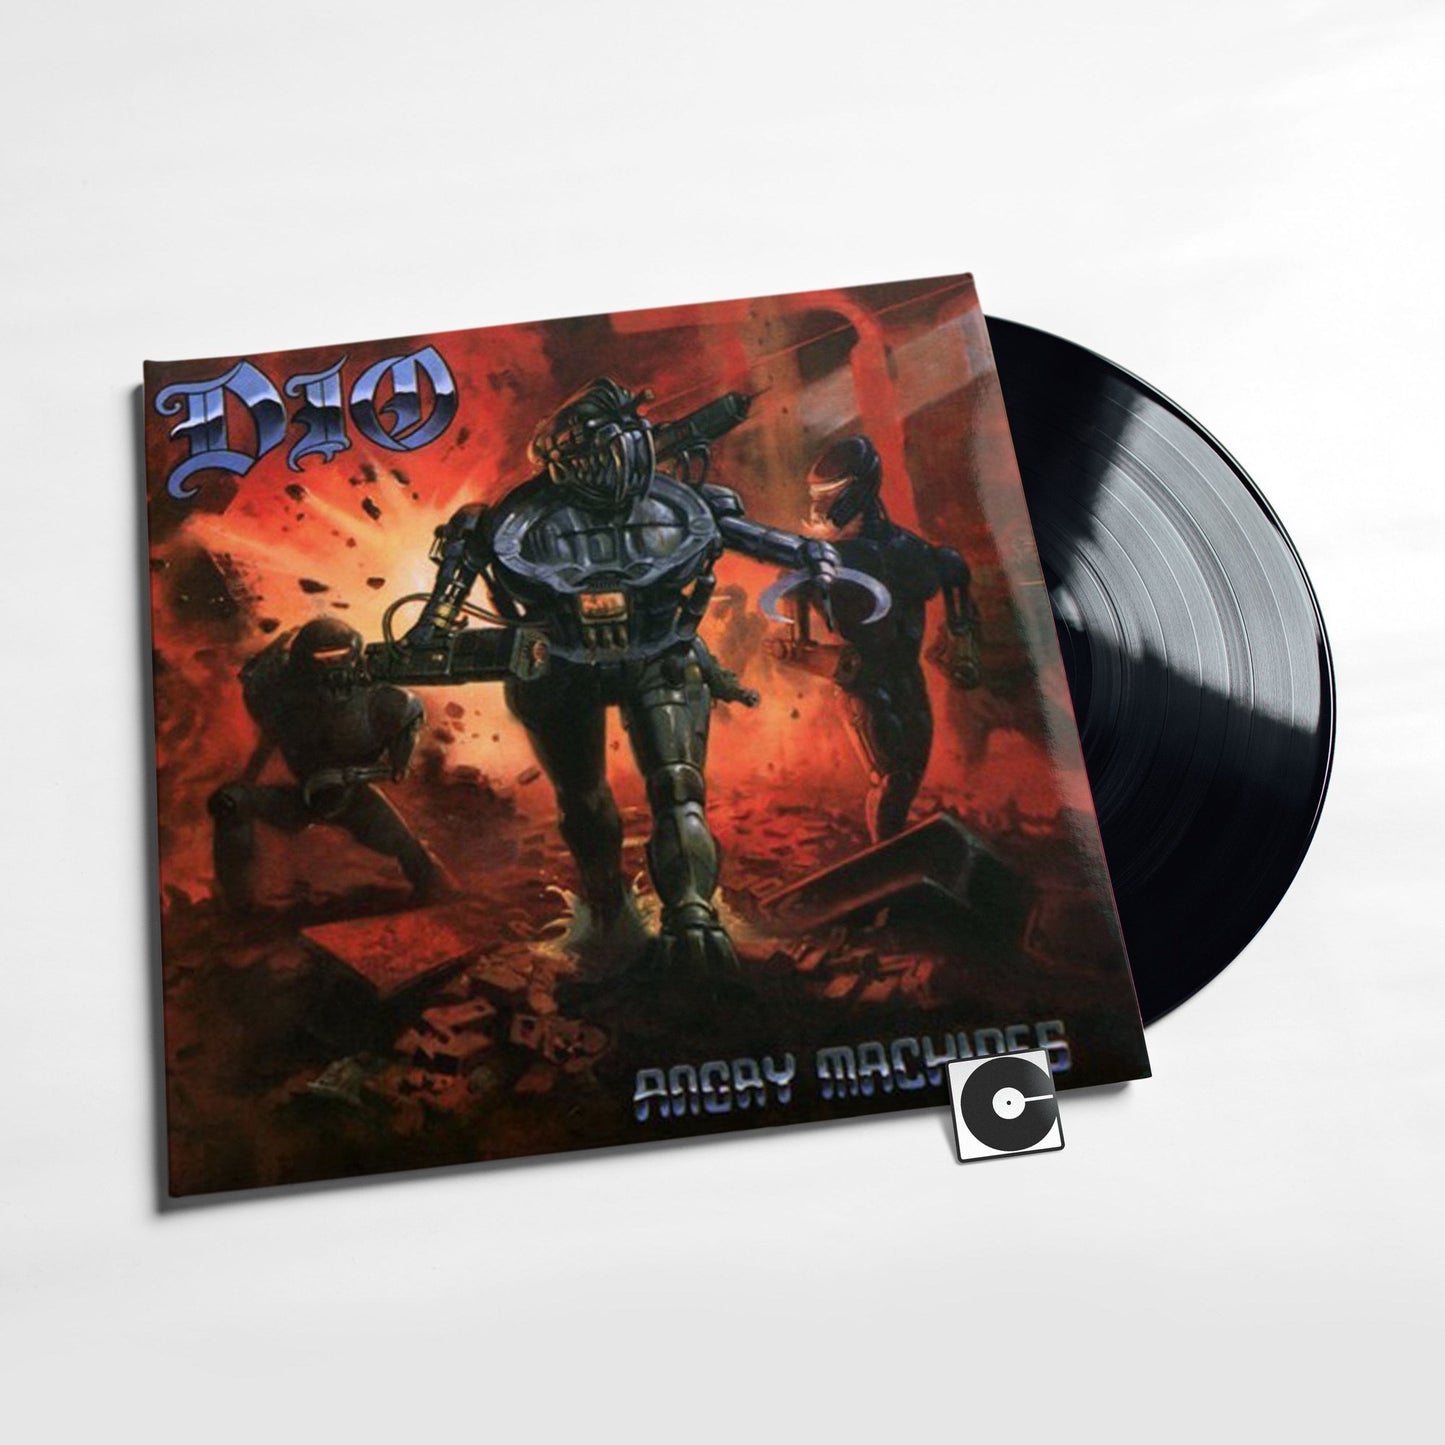 Dio - "Angry Machines"